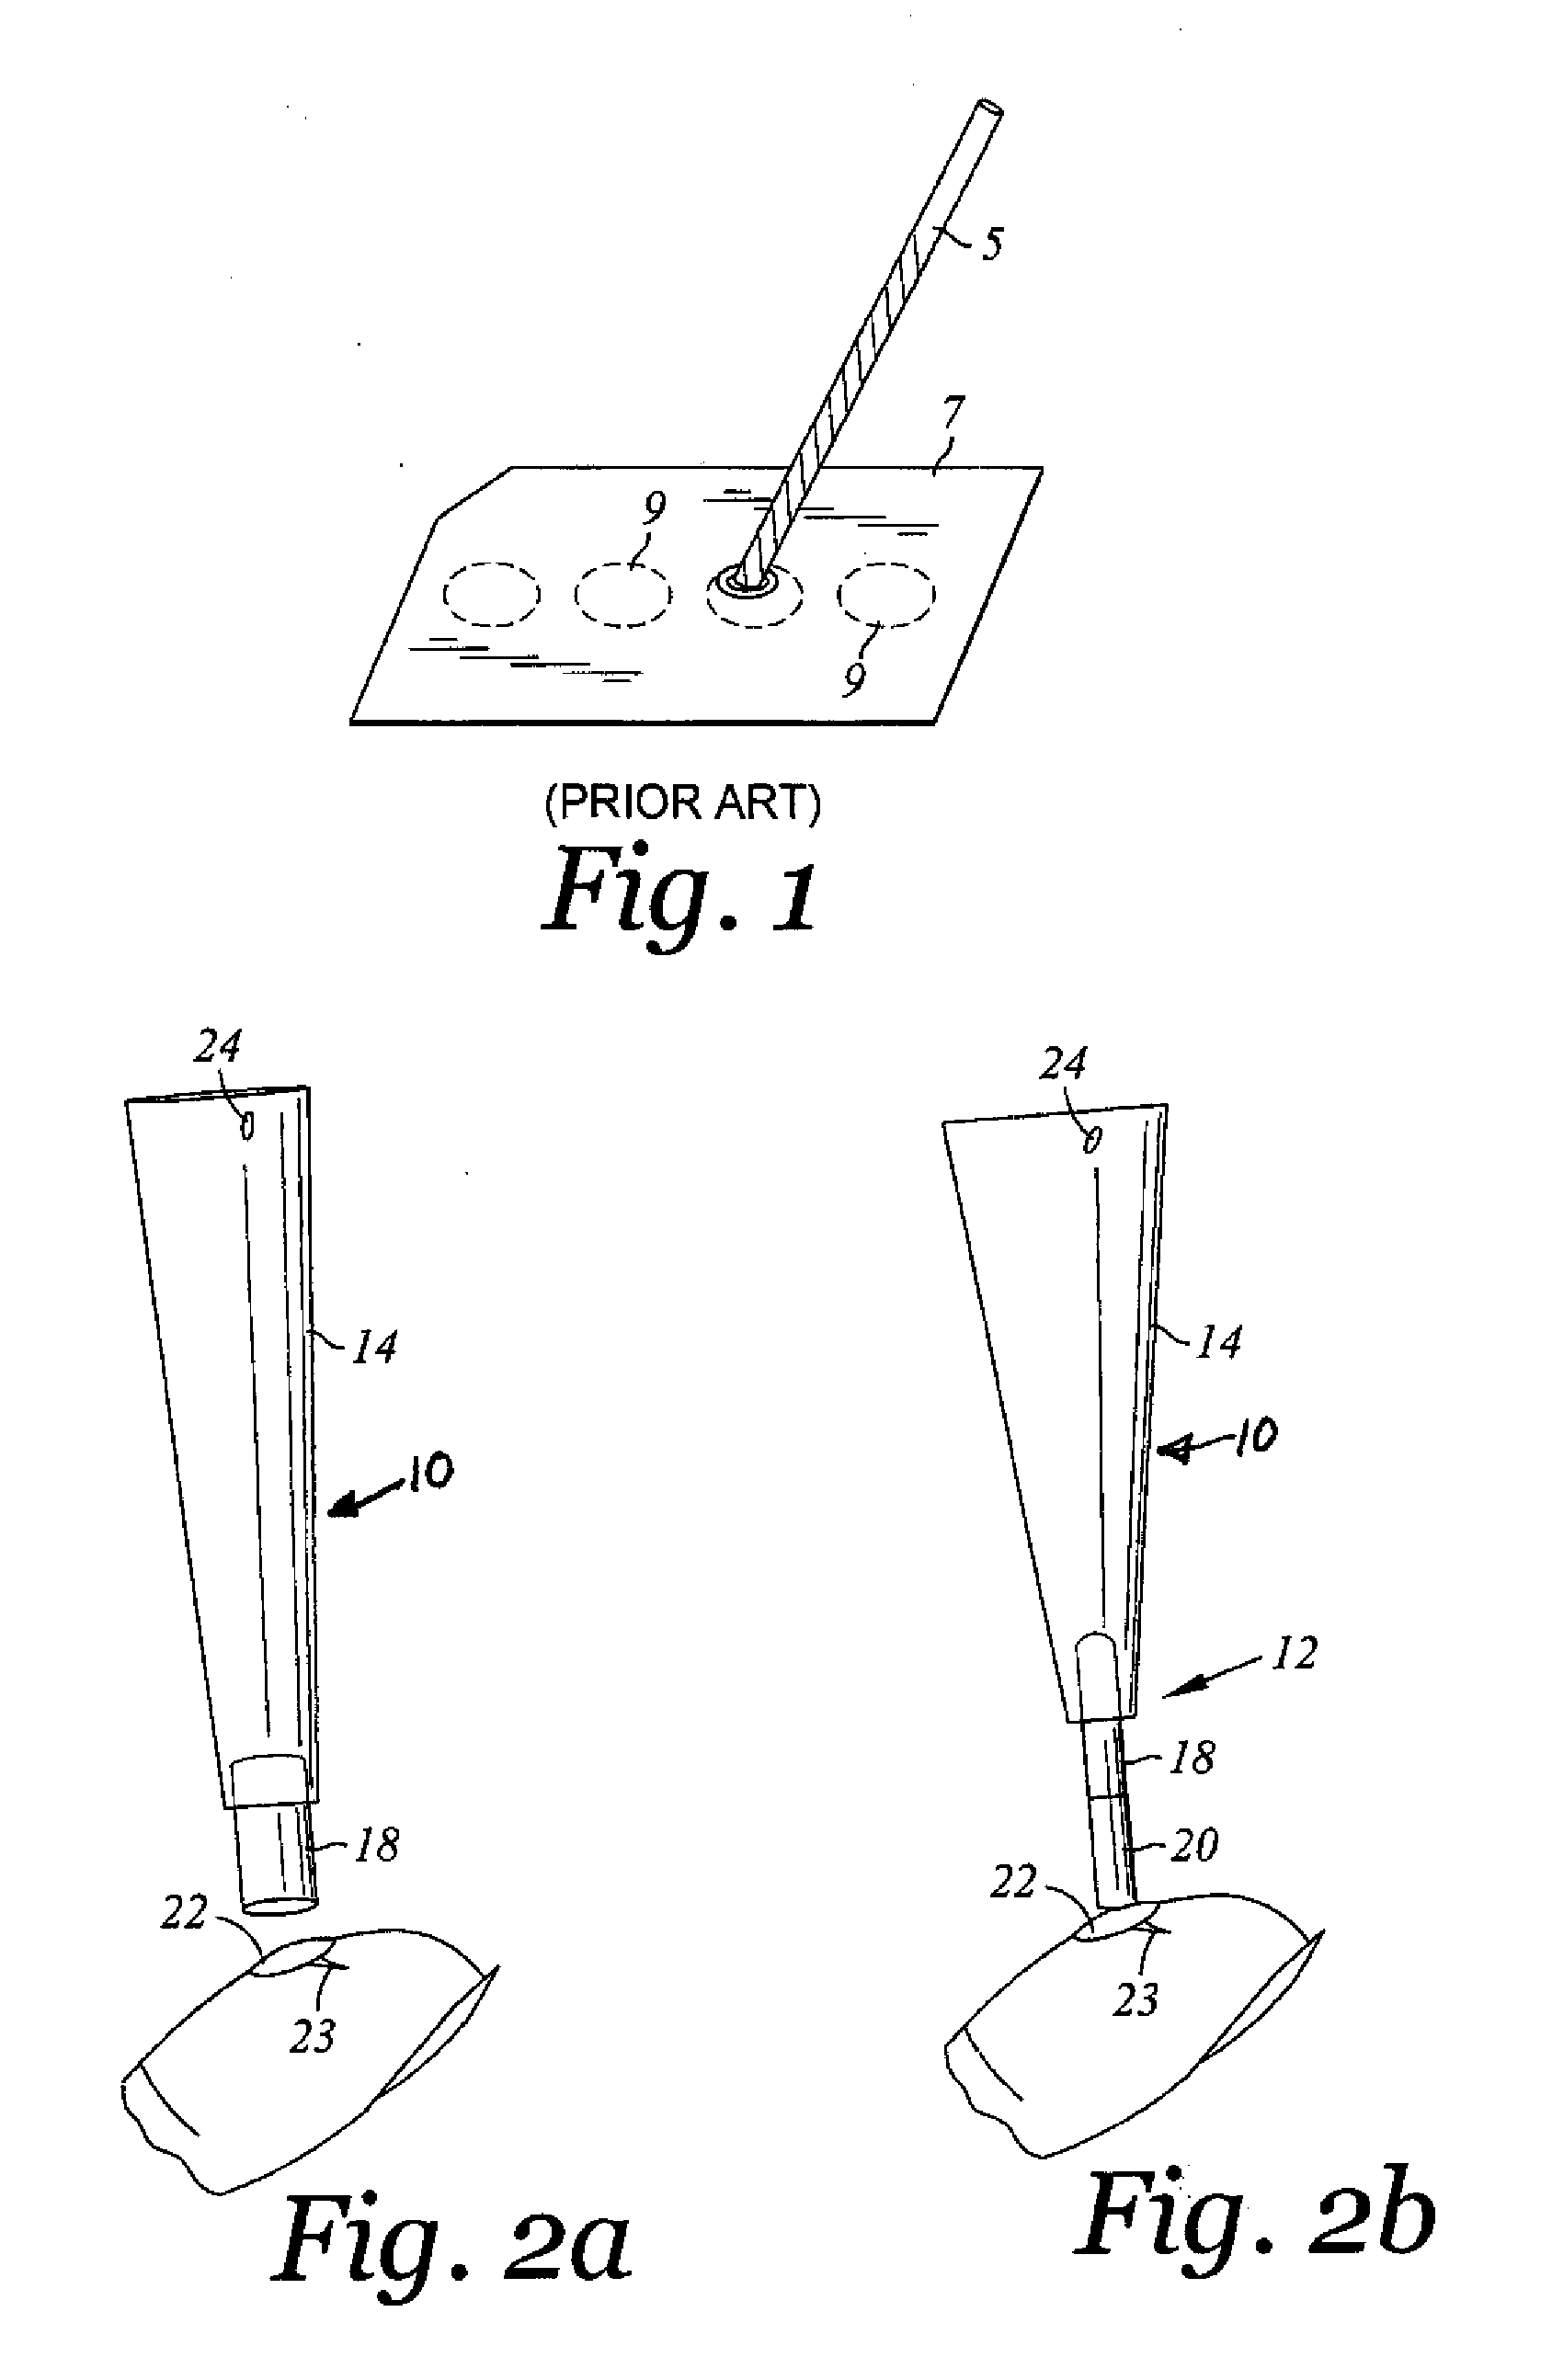 Method and apparatus for acquiring blood for testing